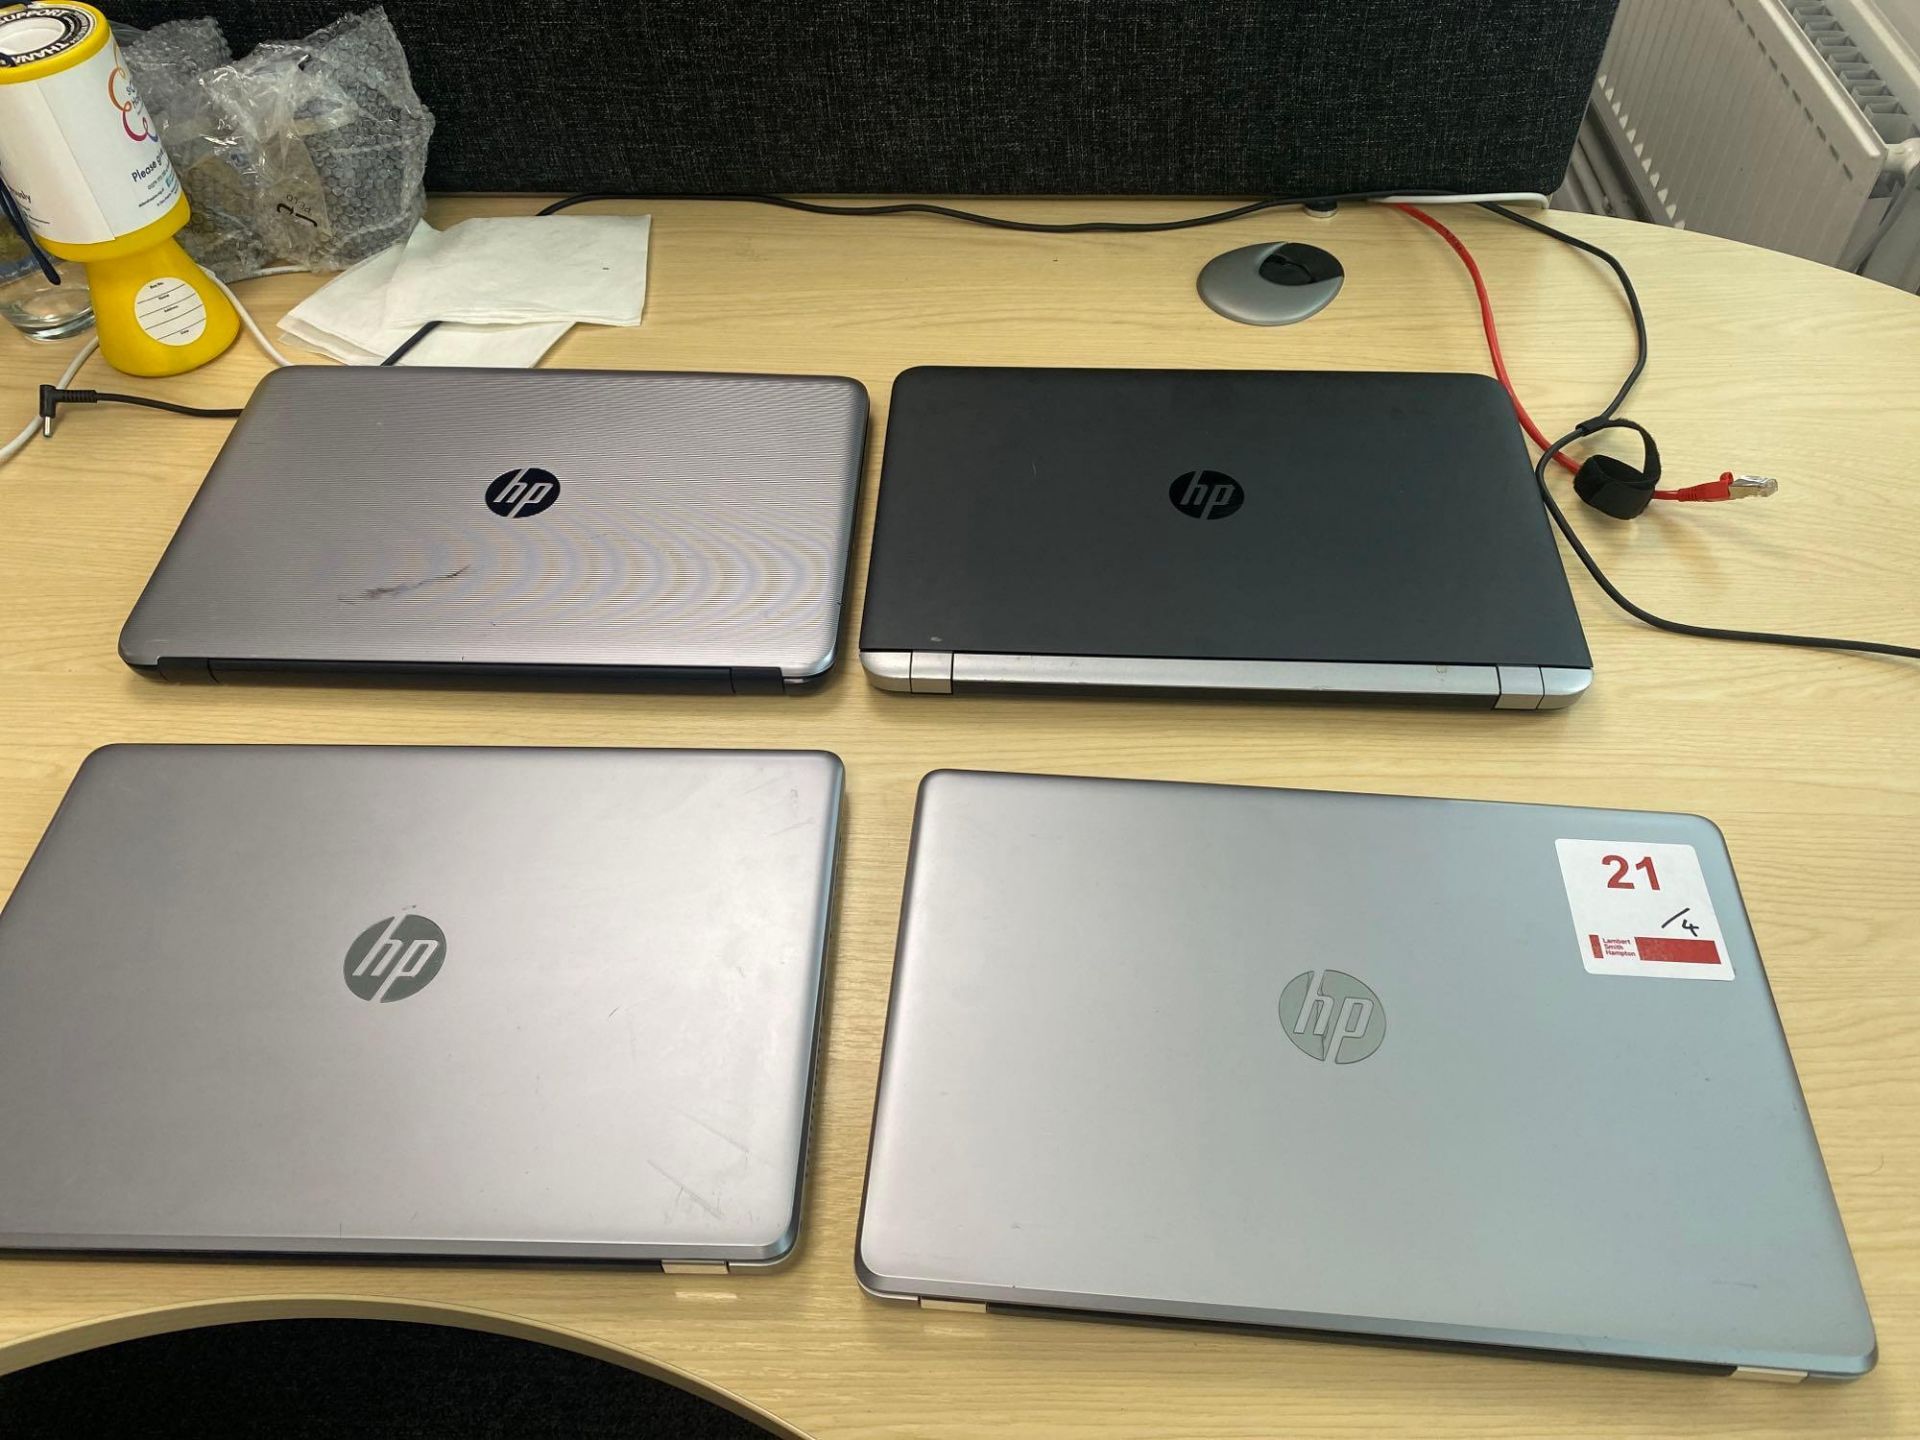 4 various Hewlett Packard 15” laptops with i3 processors and chargers